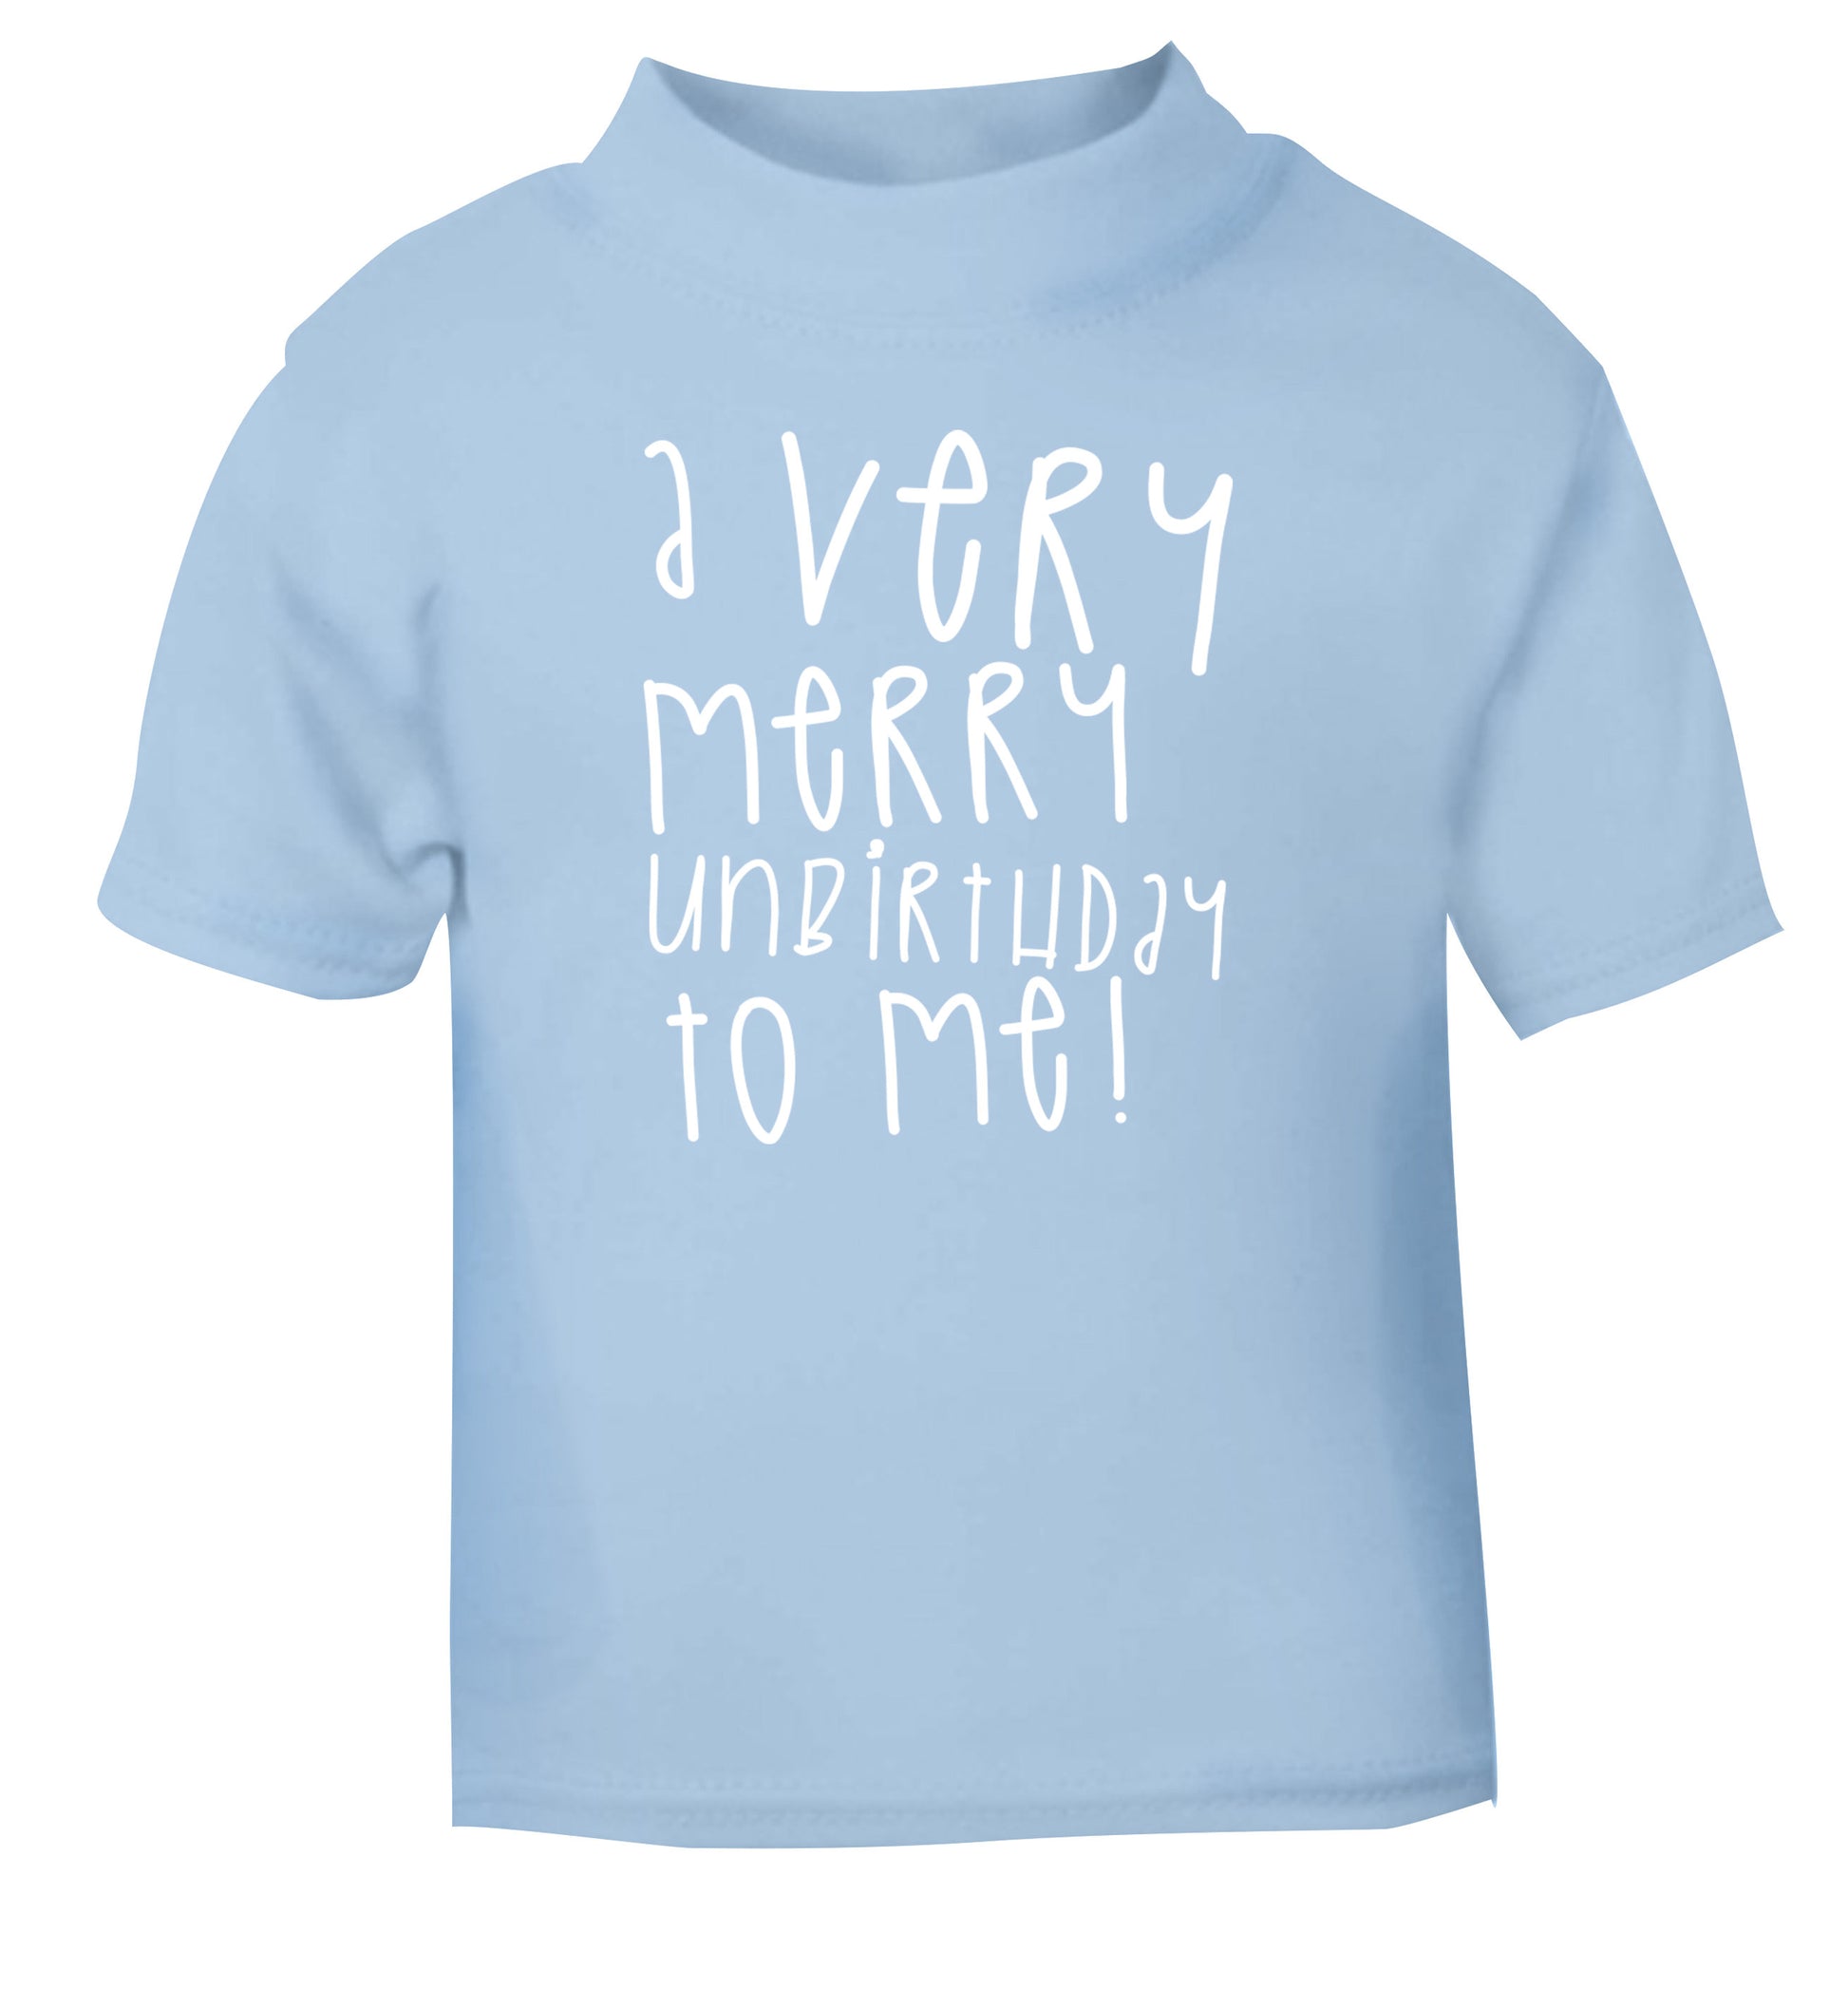 A very merry unbirthday to me! light blue Baby Toddler Tshirt 2 Years